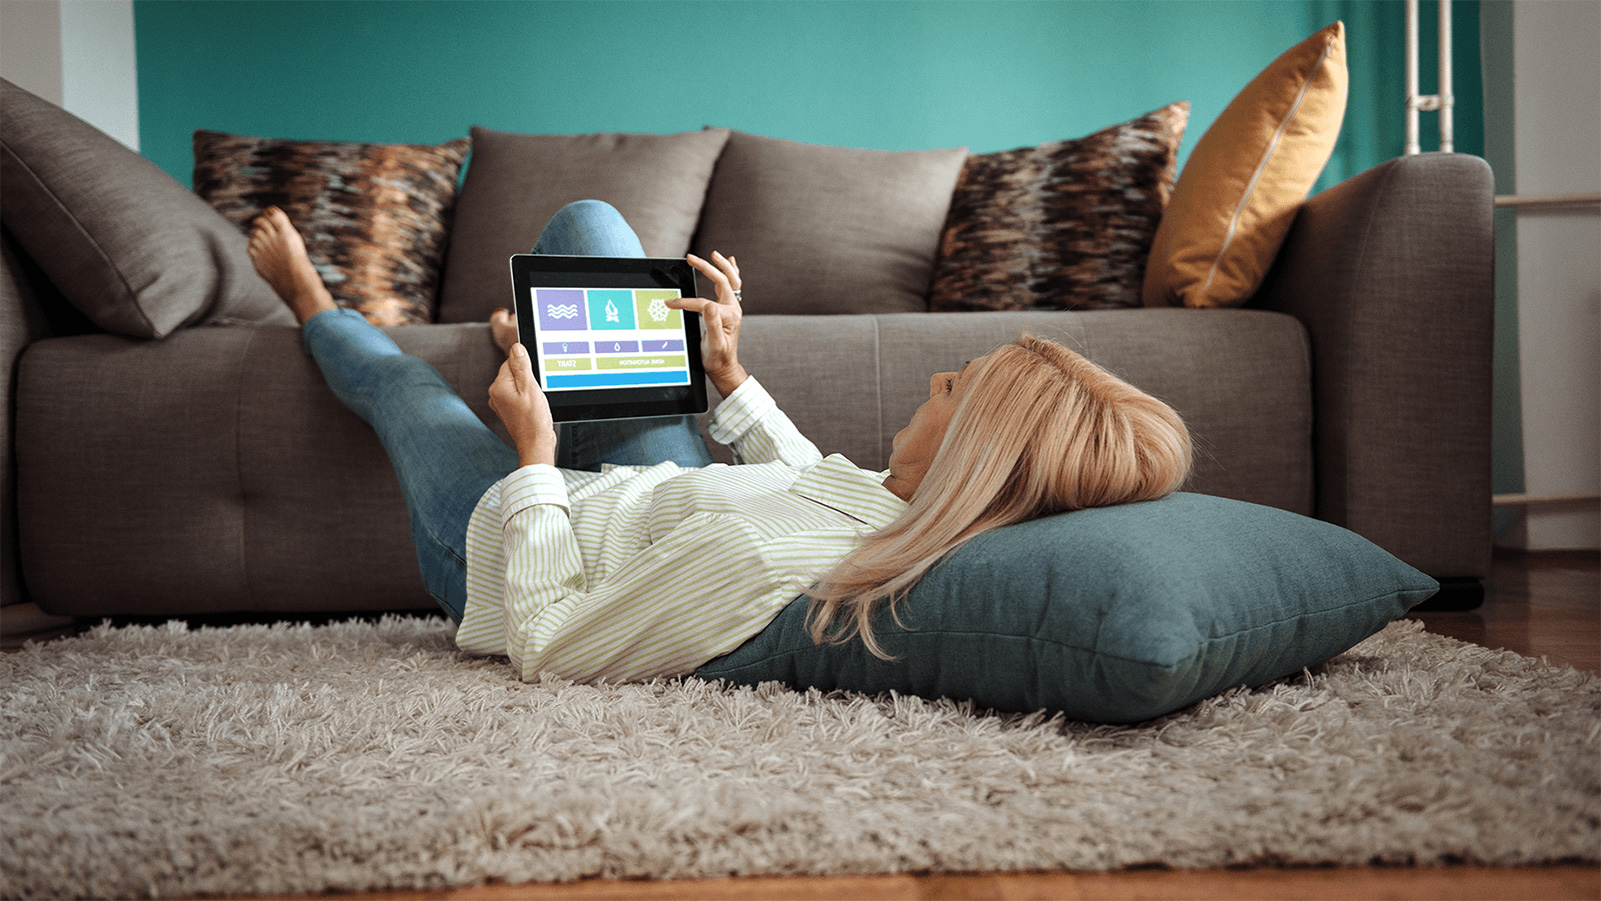 Woman relaxing on her living room floor and using her tablet.